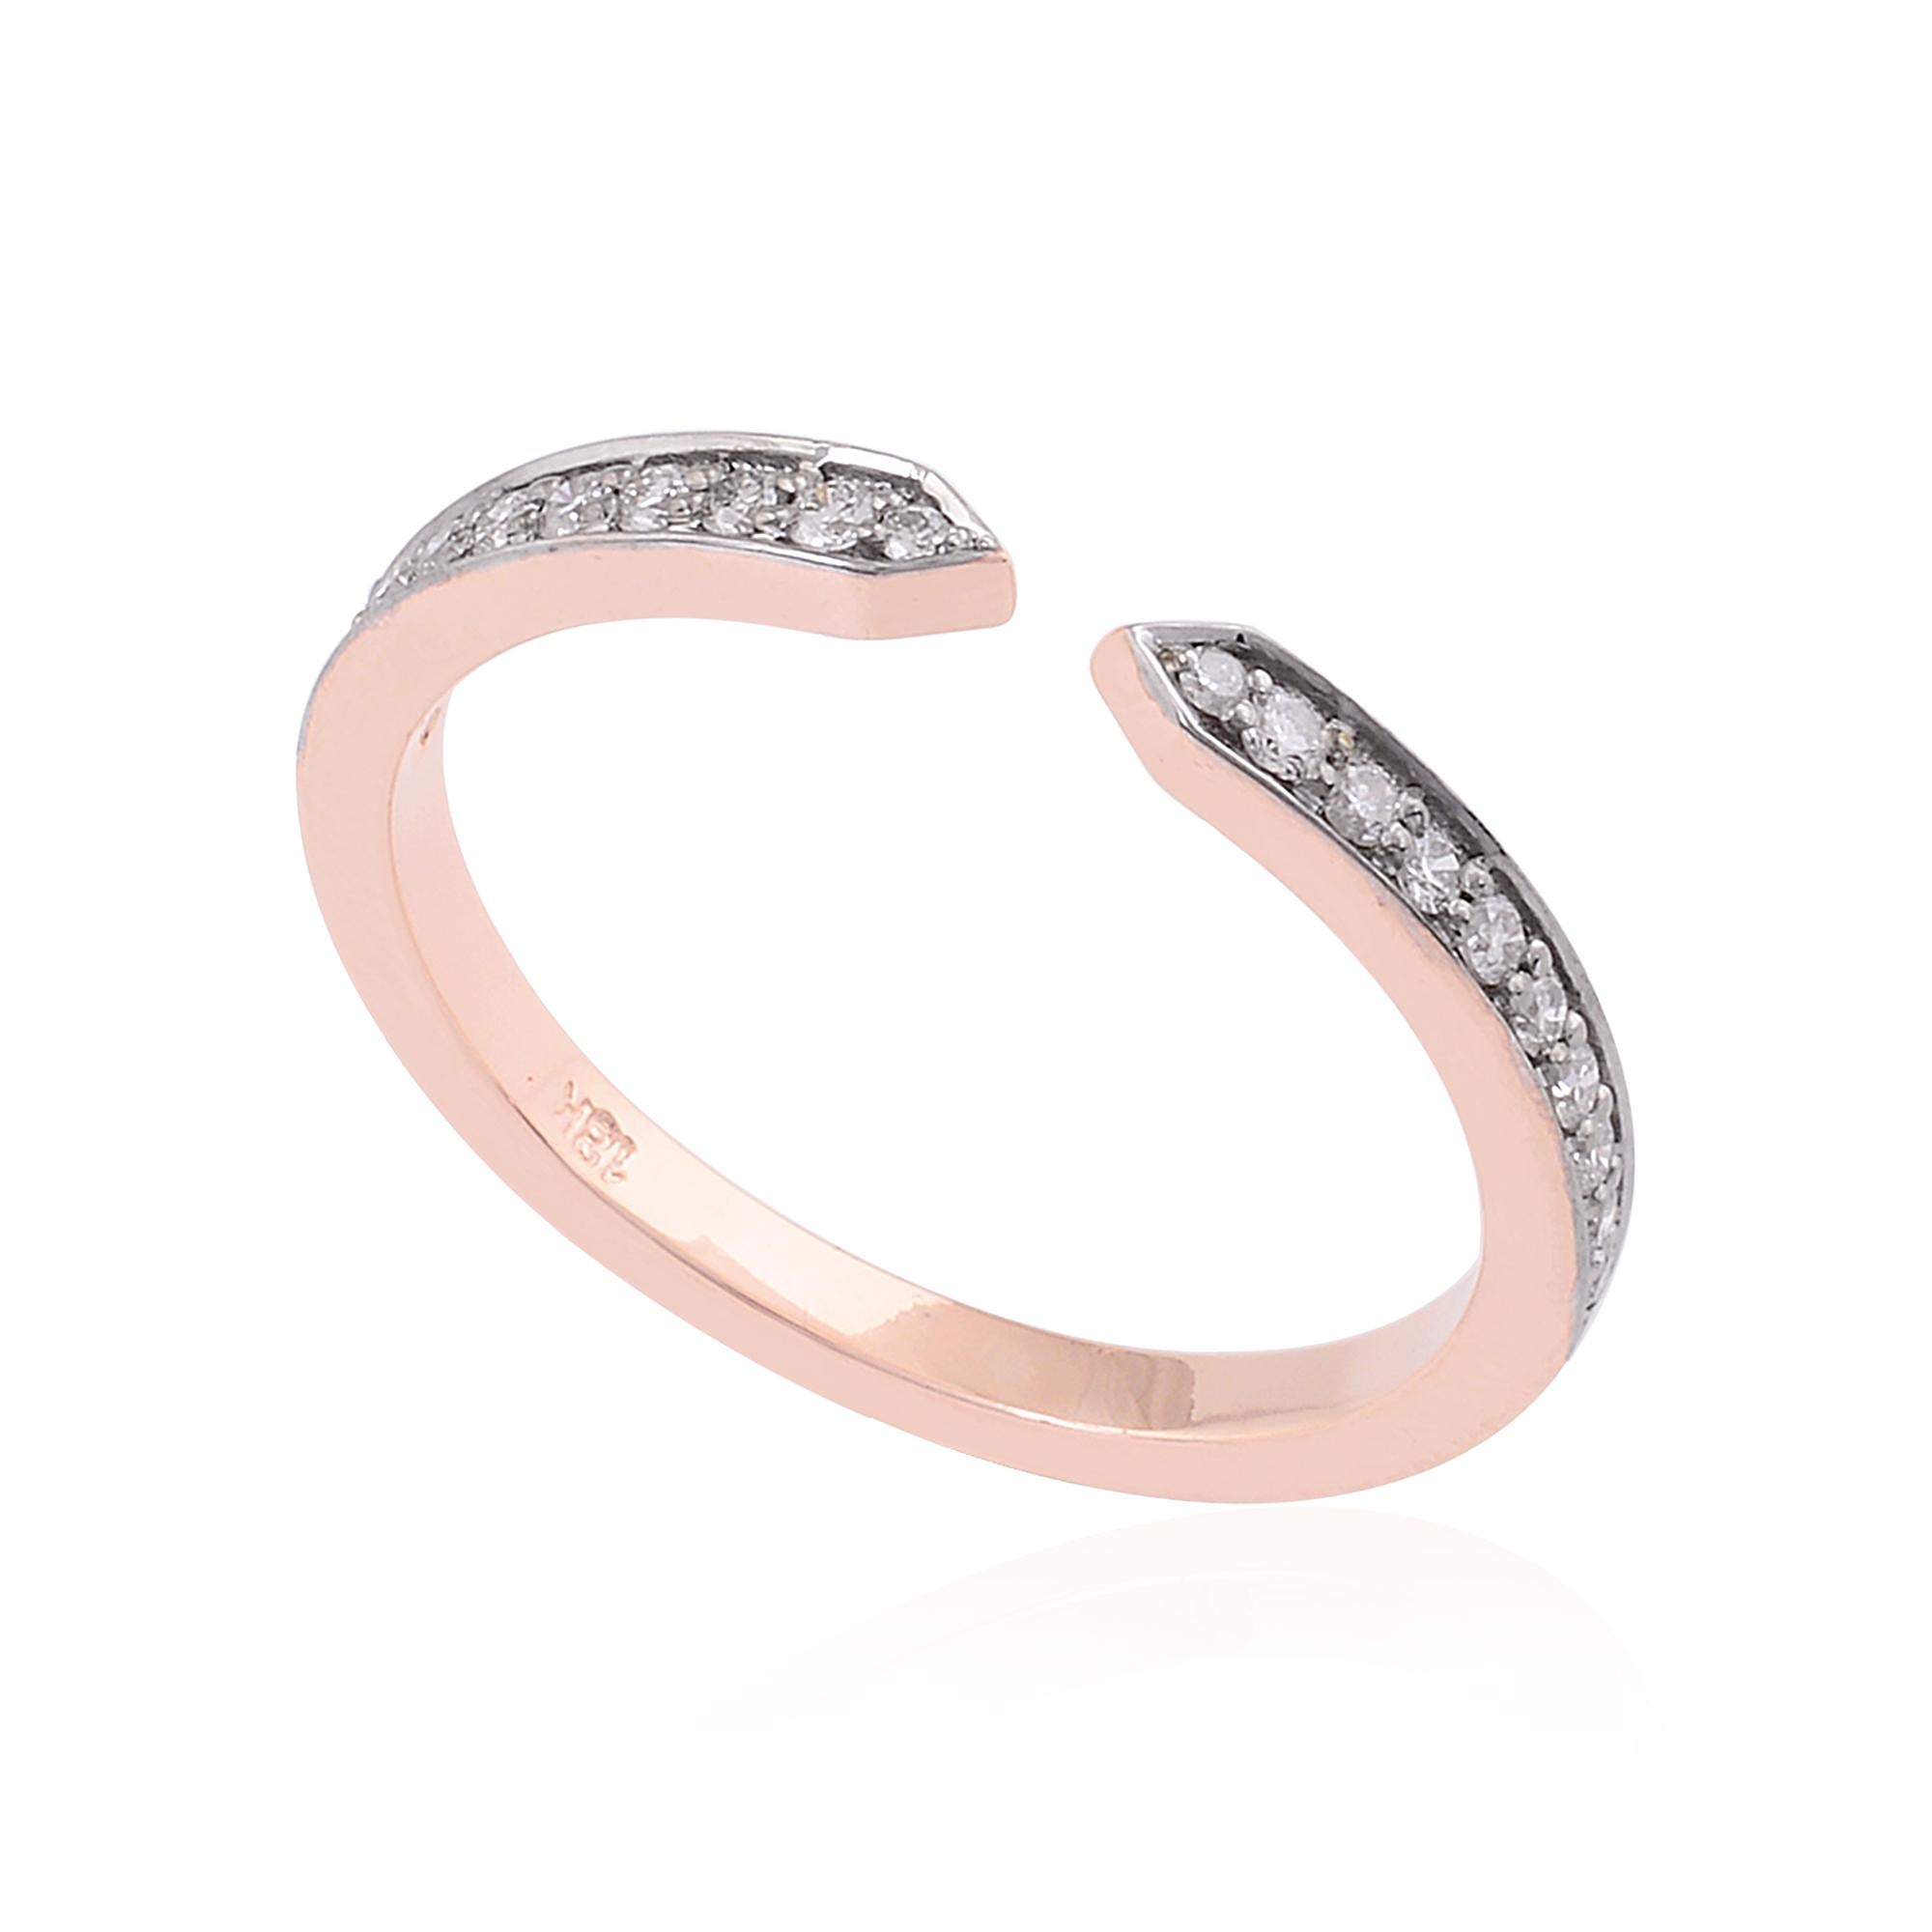 For Sale:  0.17 Carat SI Clarity HI Color Diamond Cuff Band Ring 18 Karat Rose Gold Jewelry 4